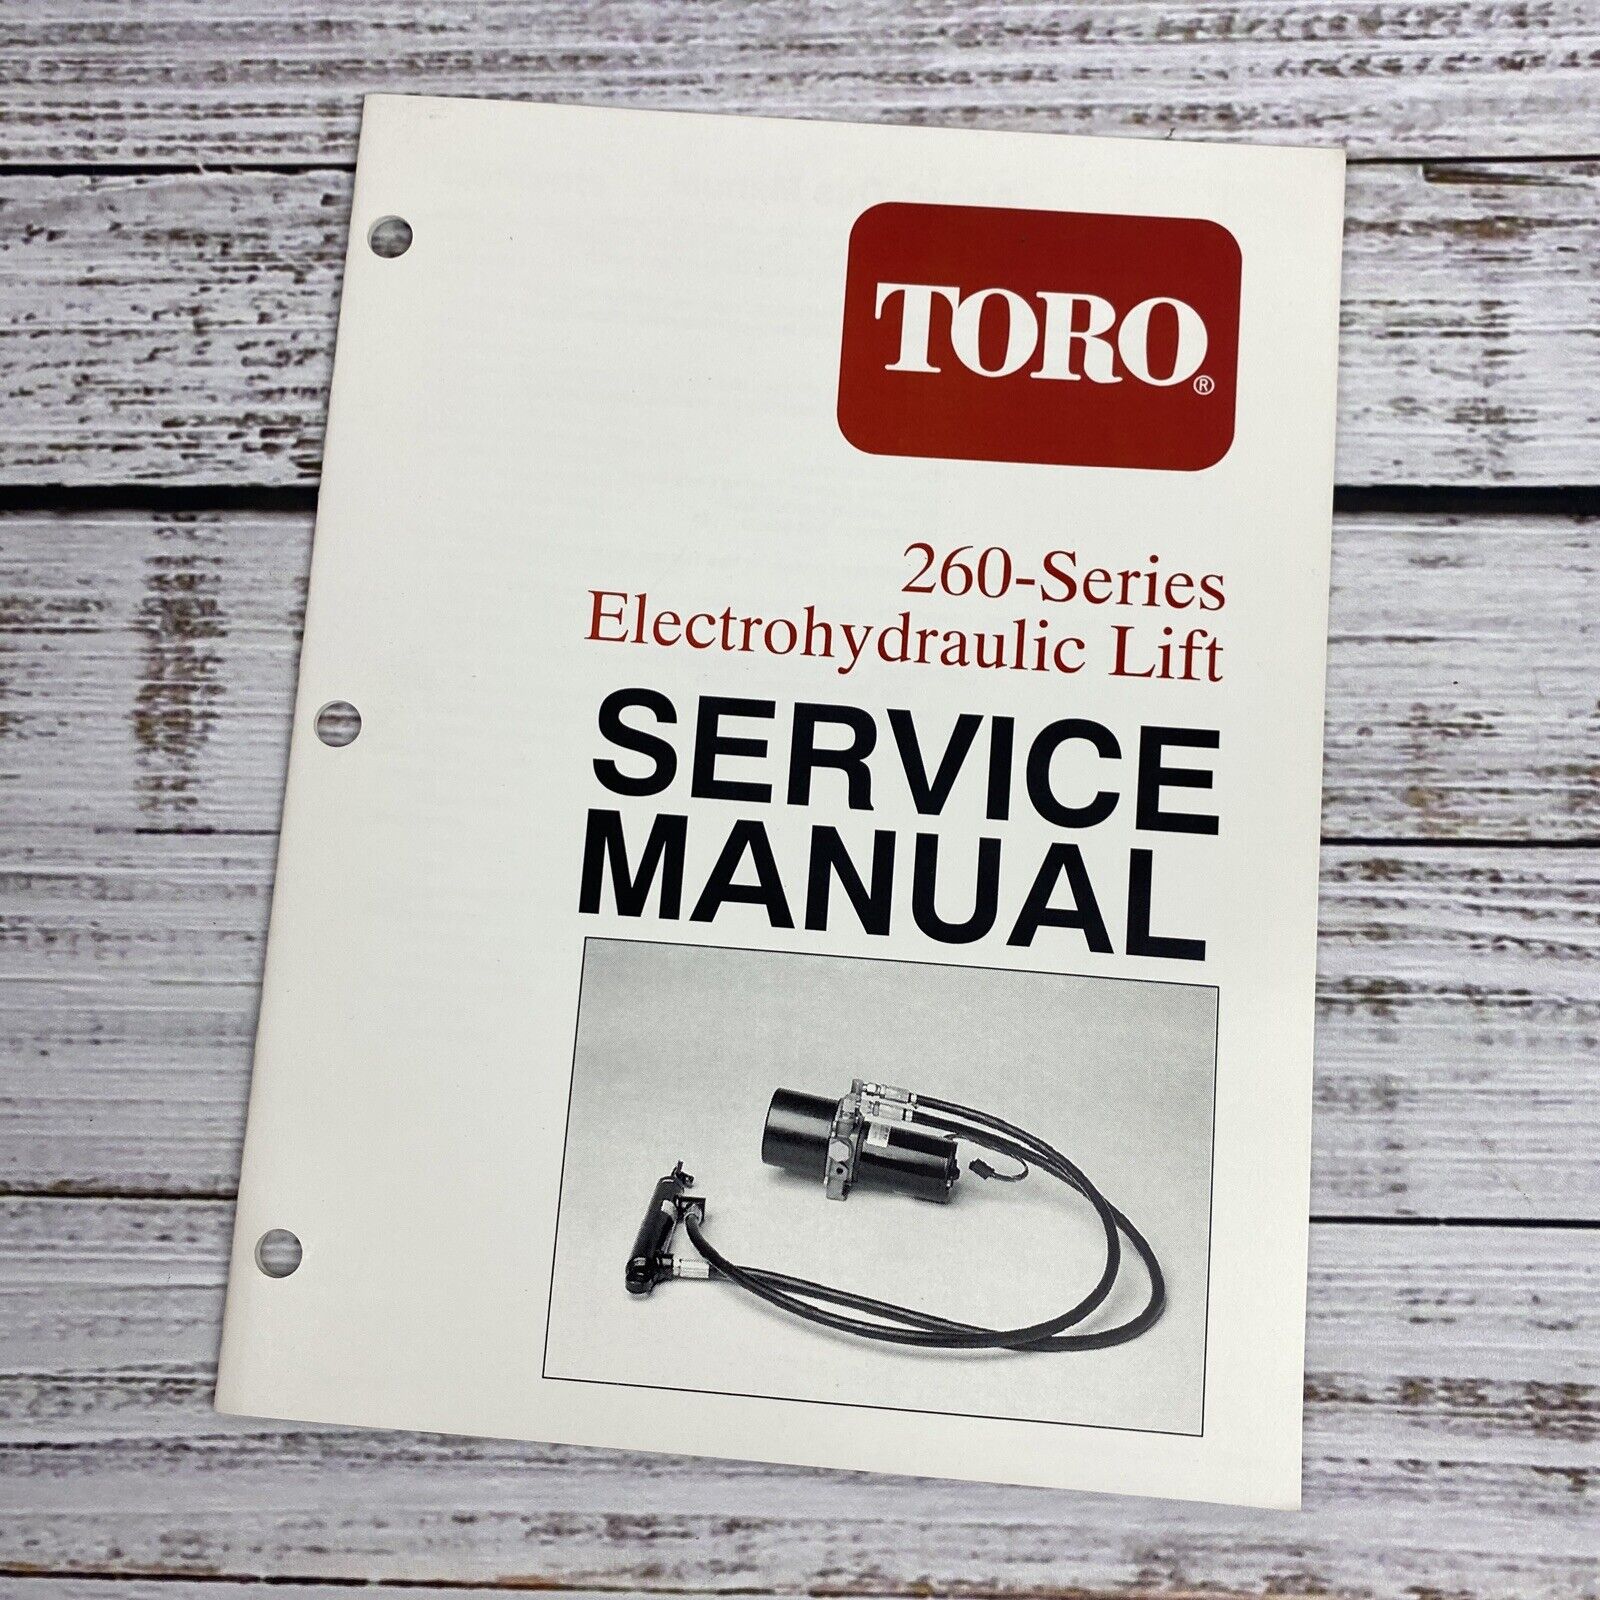 2000 Toro 260 Series Electrohydraulic Lift Service Manual For Its 260 Tractors